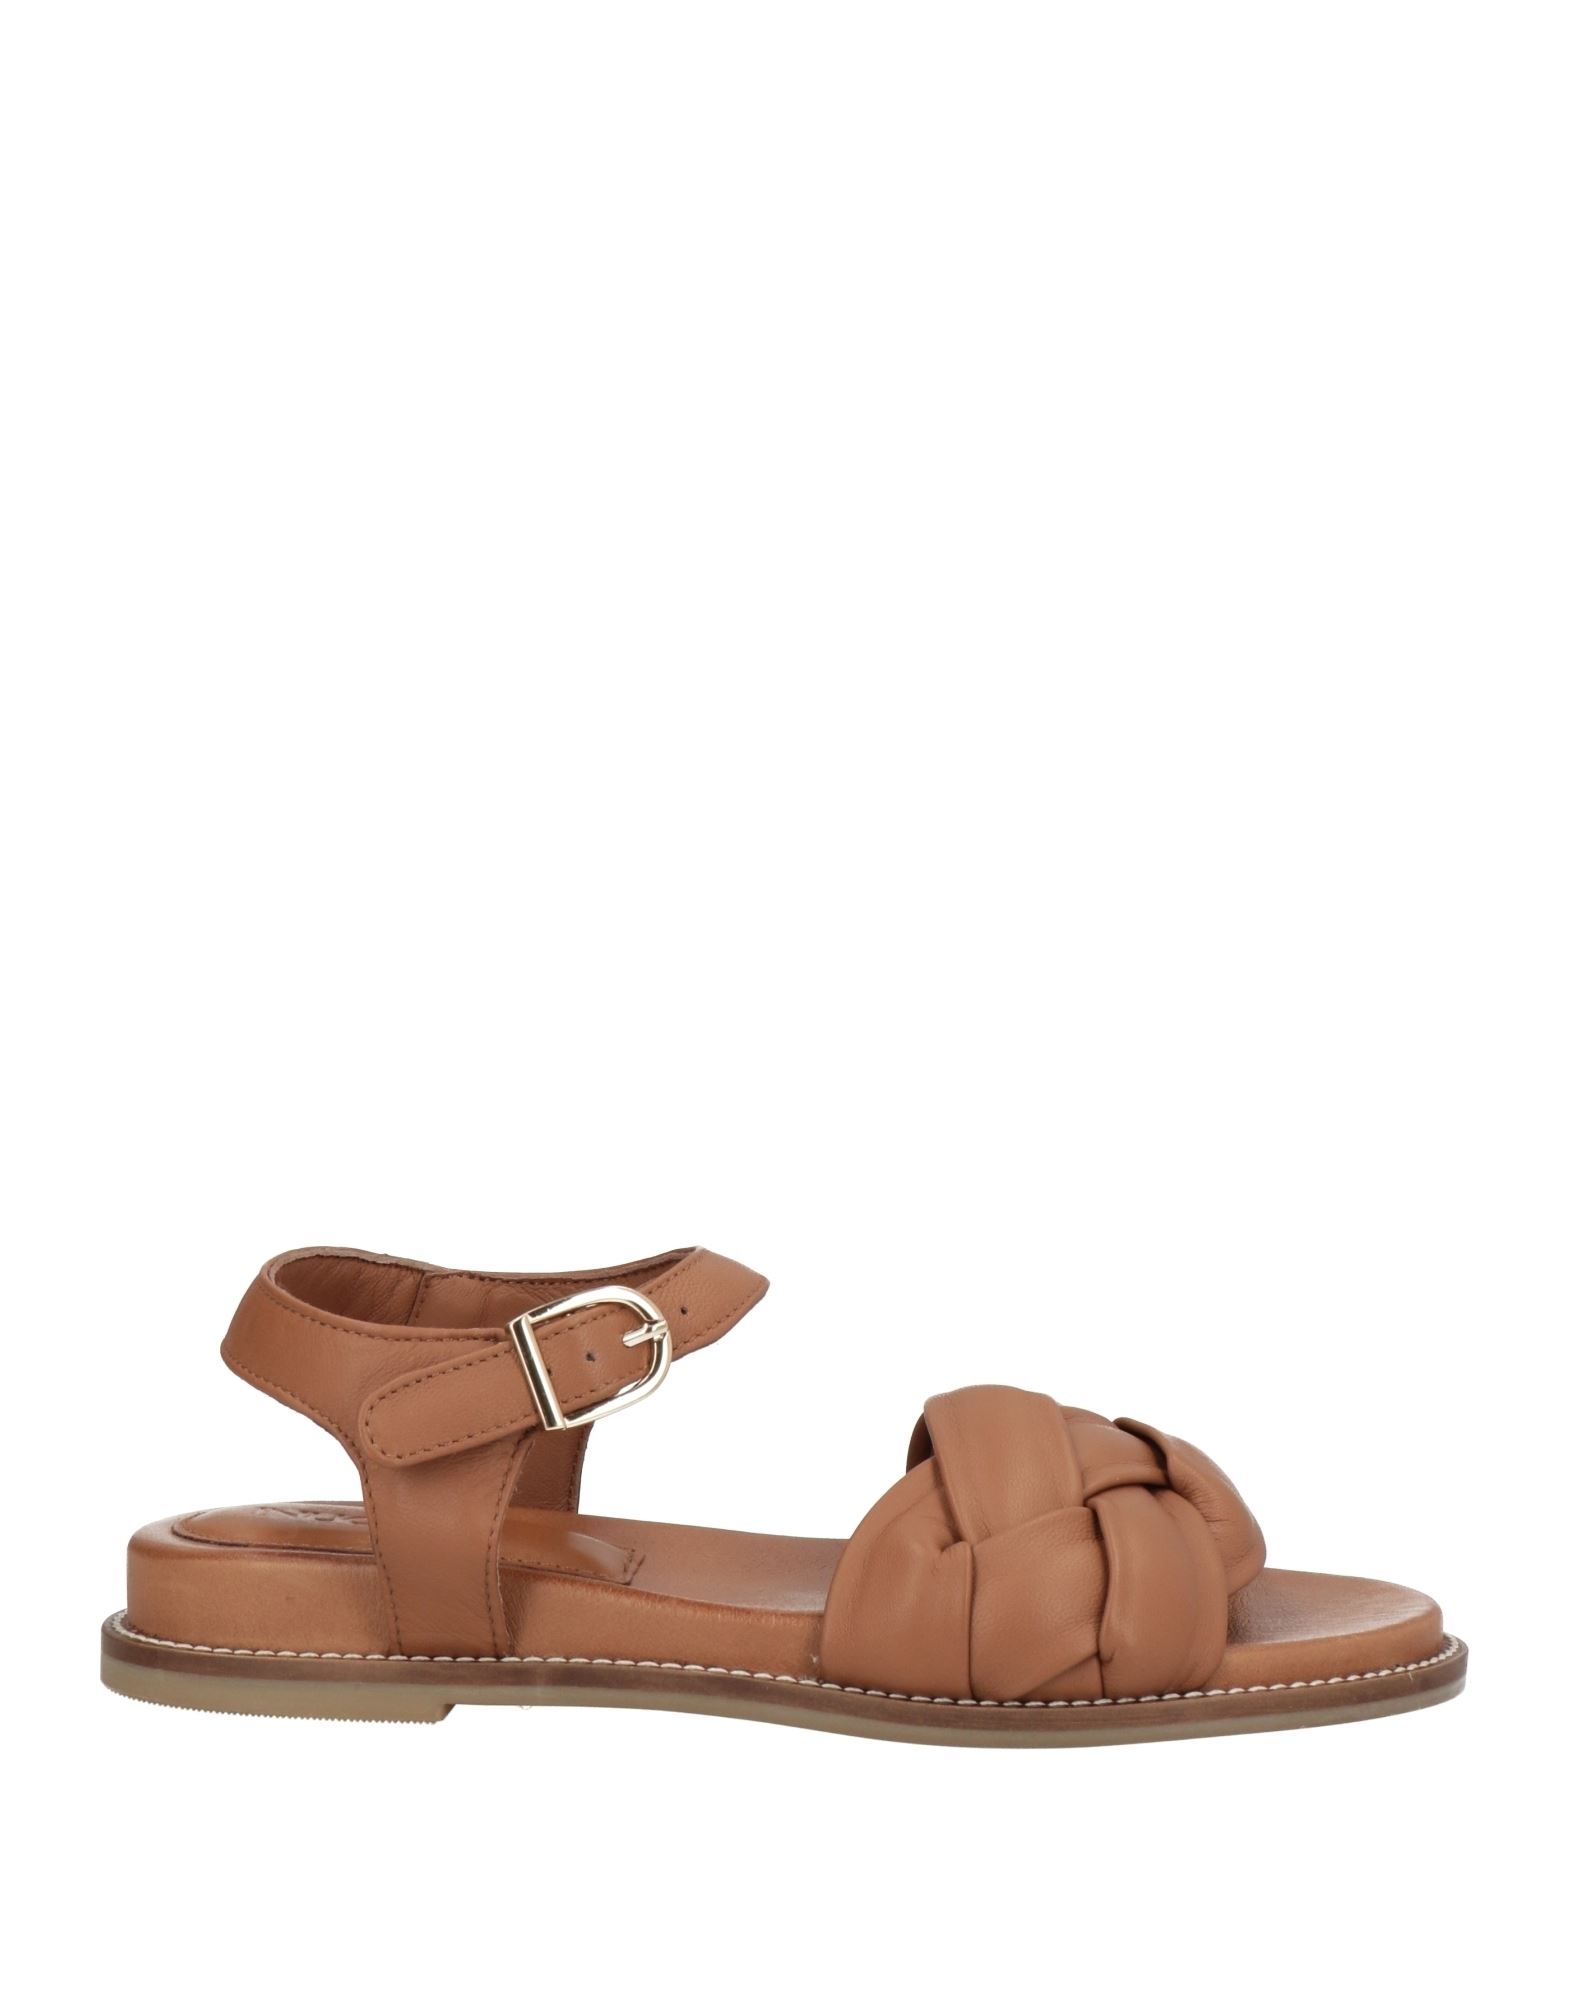 Inuovo Sandals In Brown